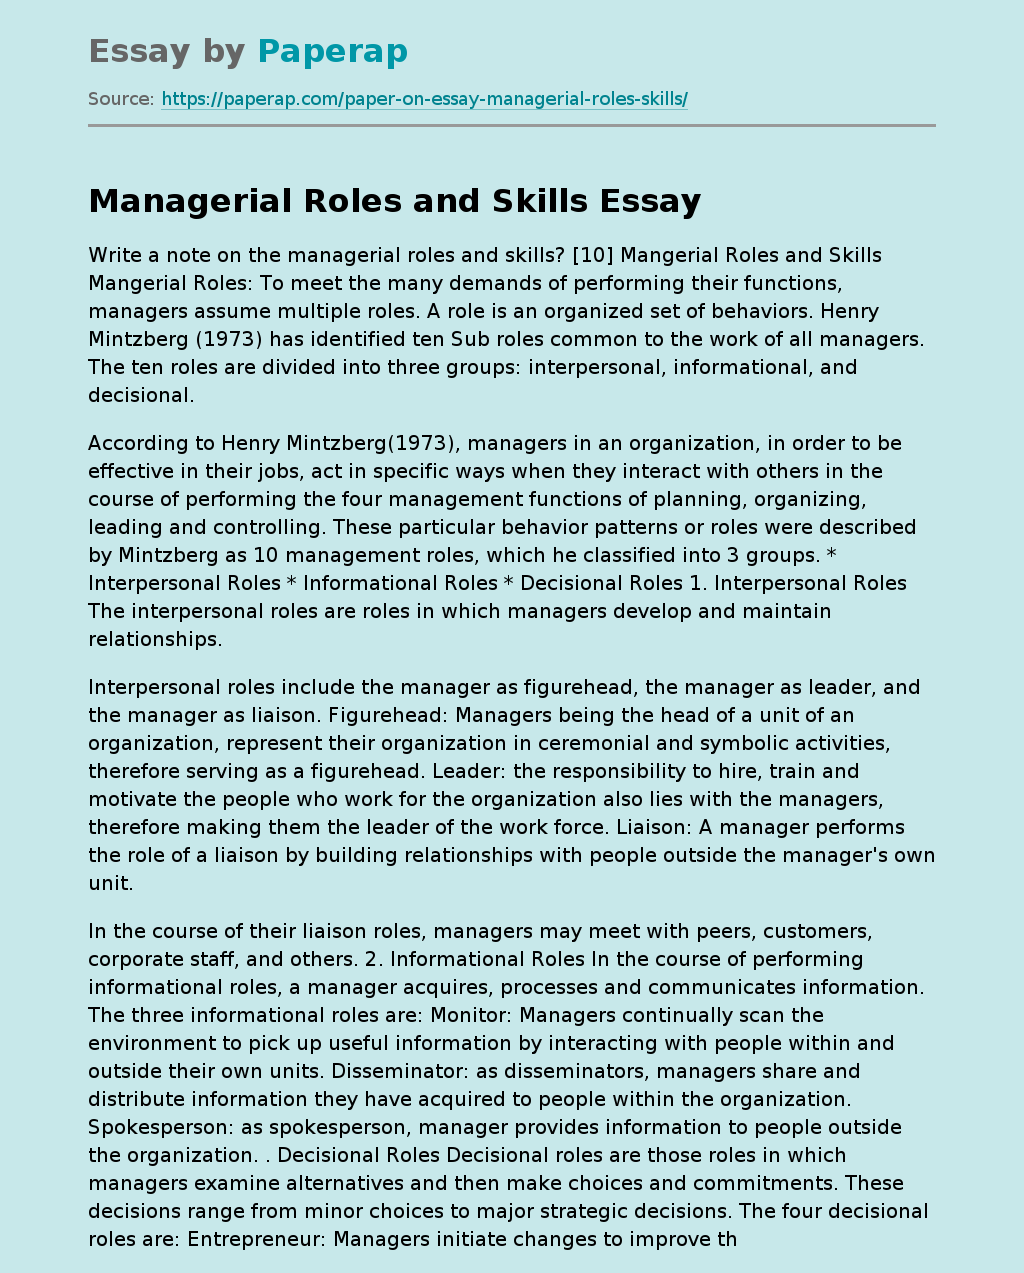 managerial skills research paper topics